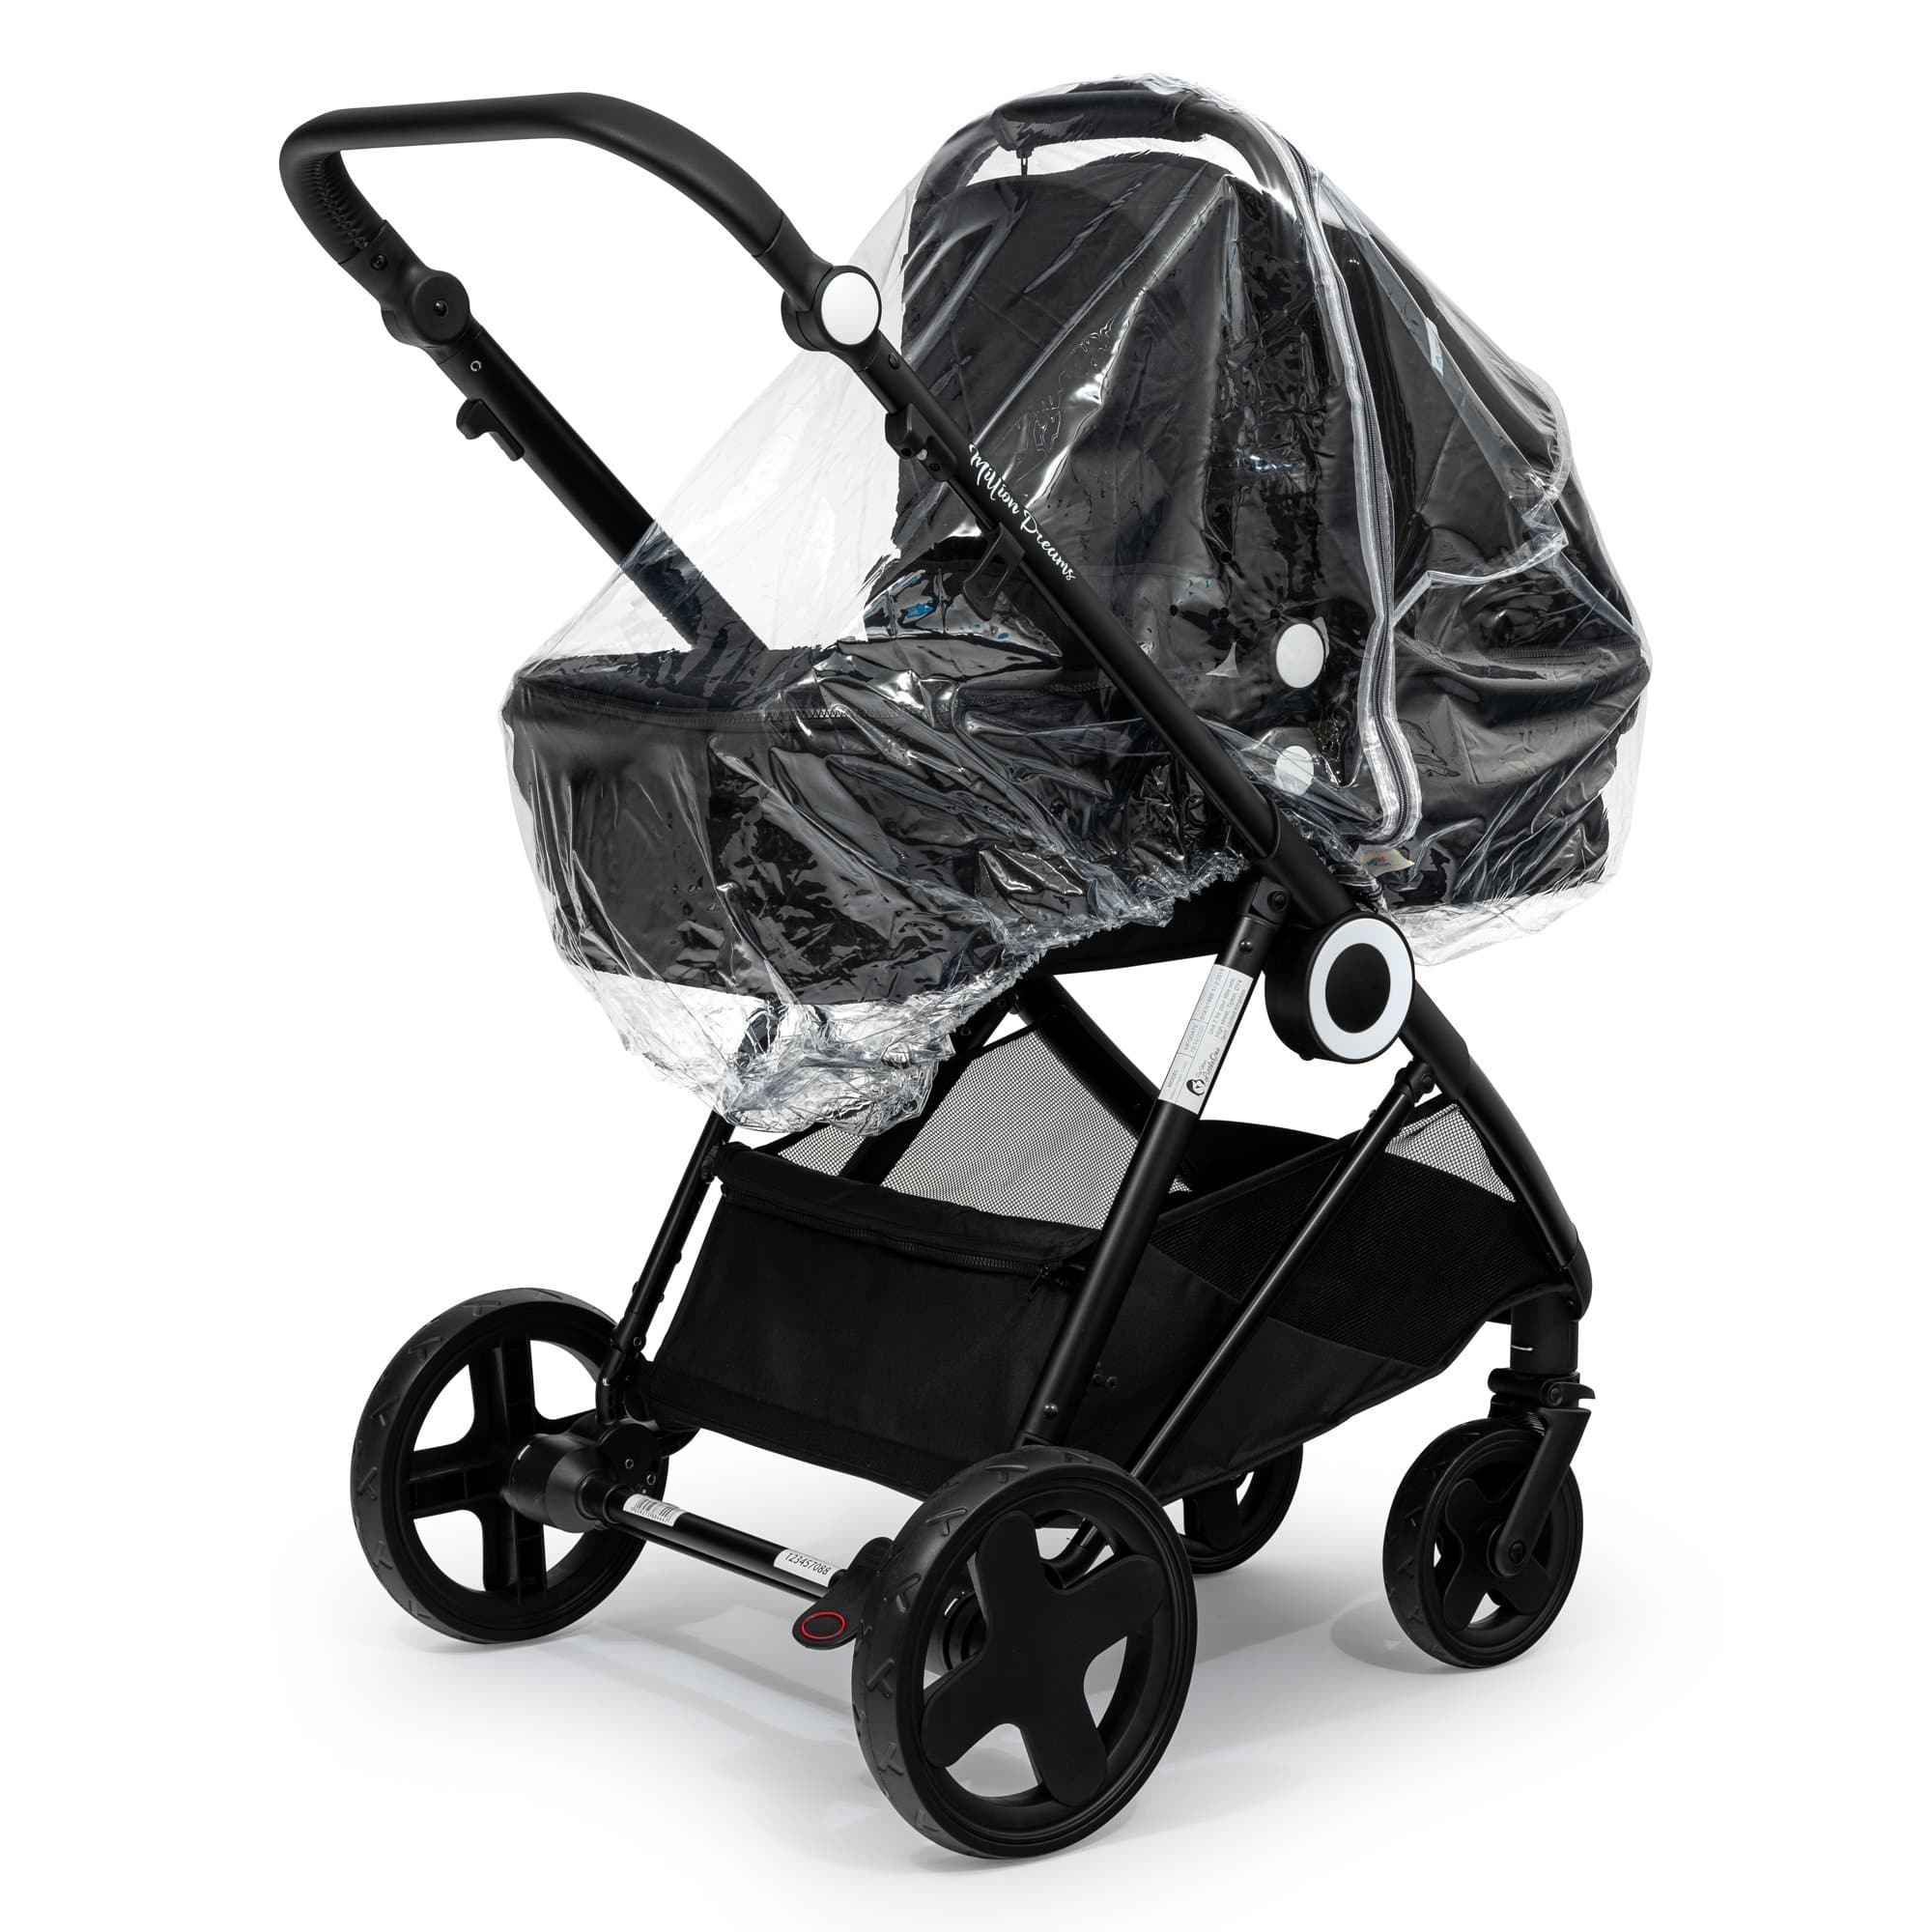 2 in 1 Rain Cover Compatible with Concord - Fits All Models - For Your Little One